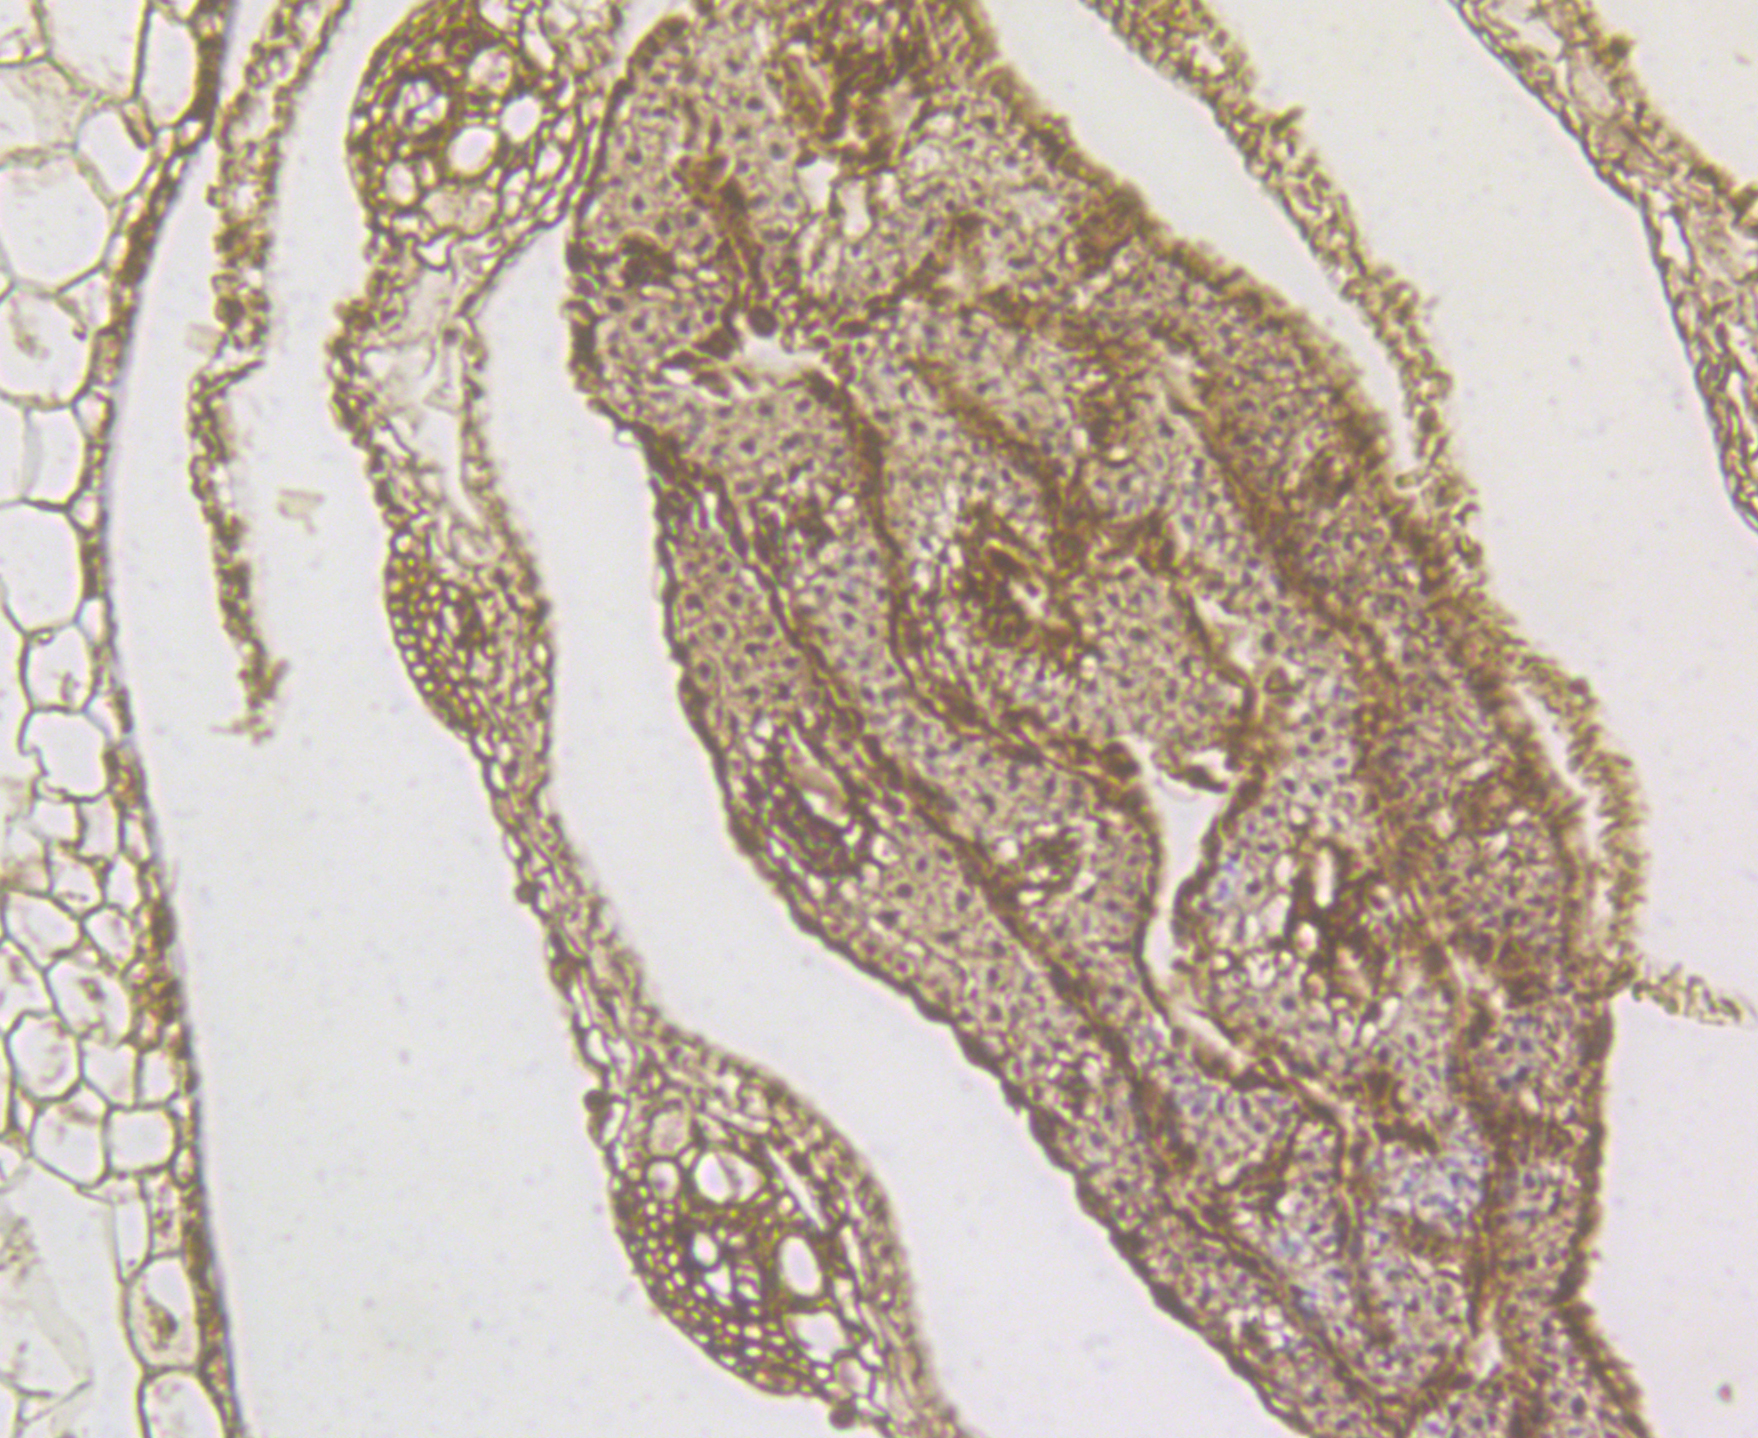 Immunohistochemical analysis of paraffin-embedded rice stem tissue using anti-Rice Os01g0847700 protein antibody. Counter stained with hematoxylin.